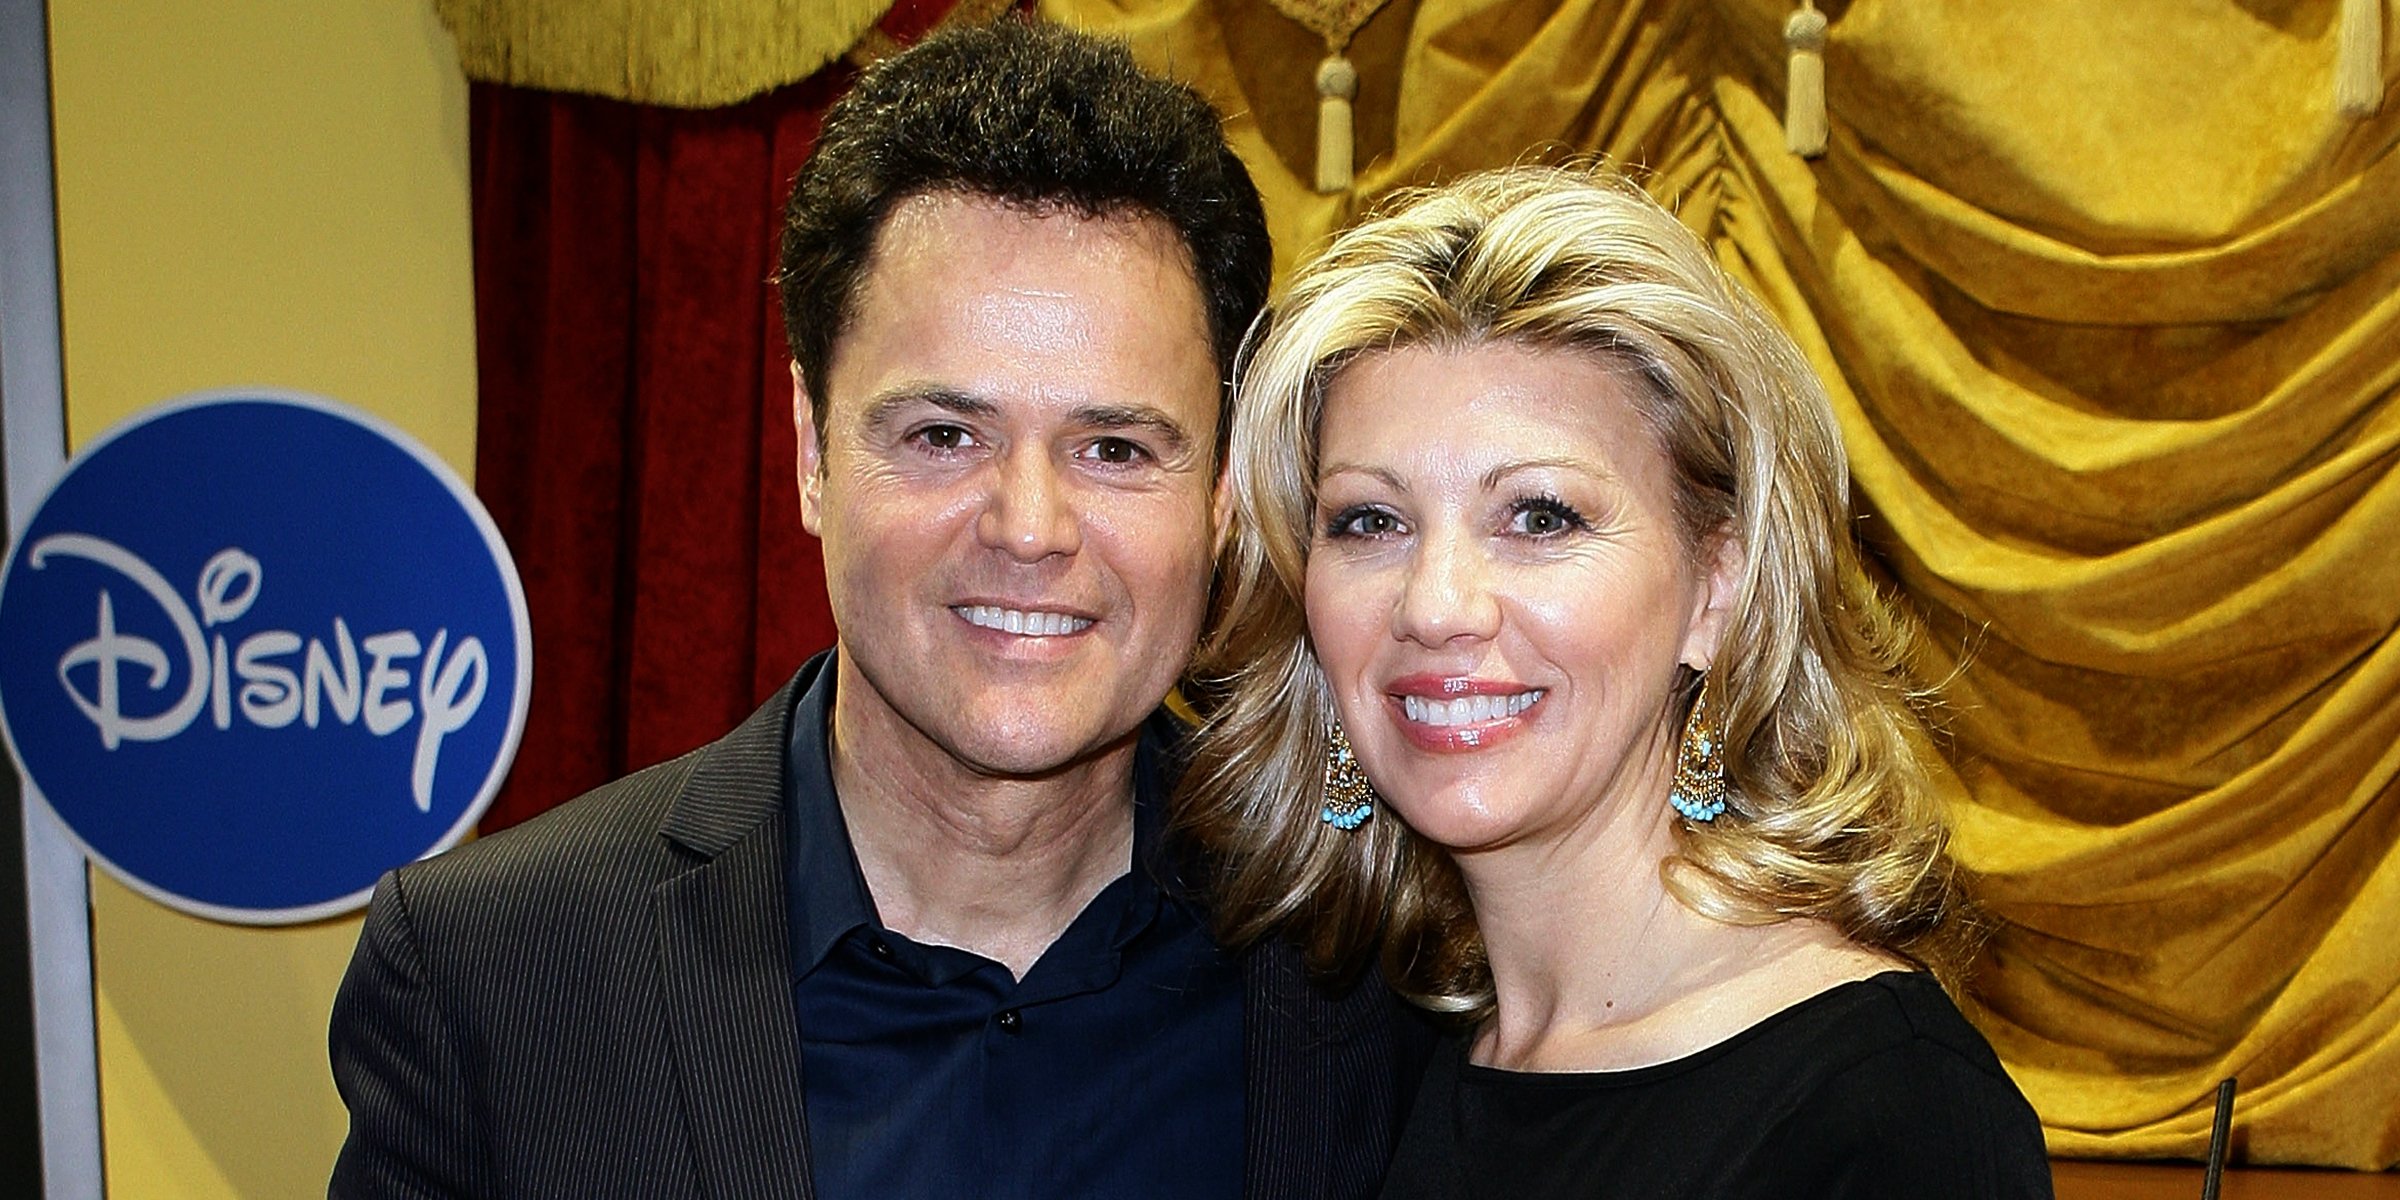 Donny Osmond and Debbie Osmond, 2010 | Source: Getty Images